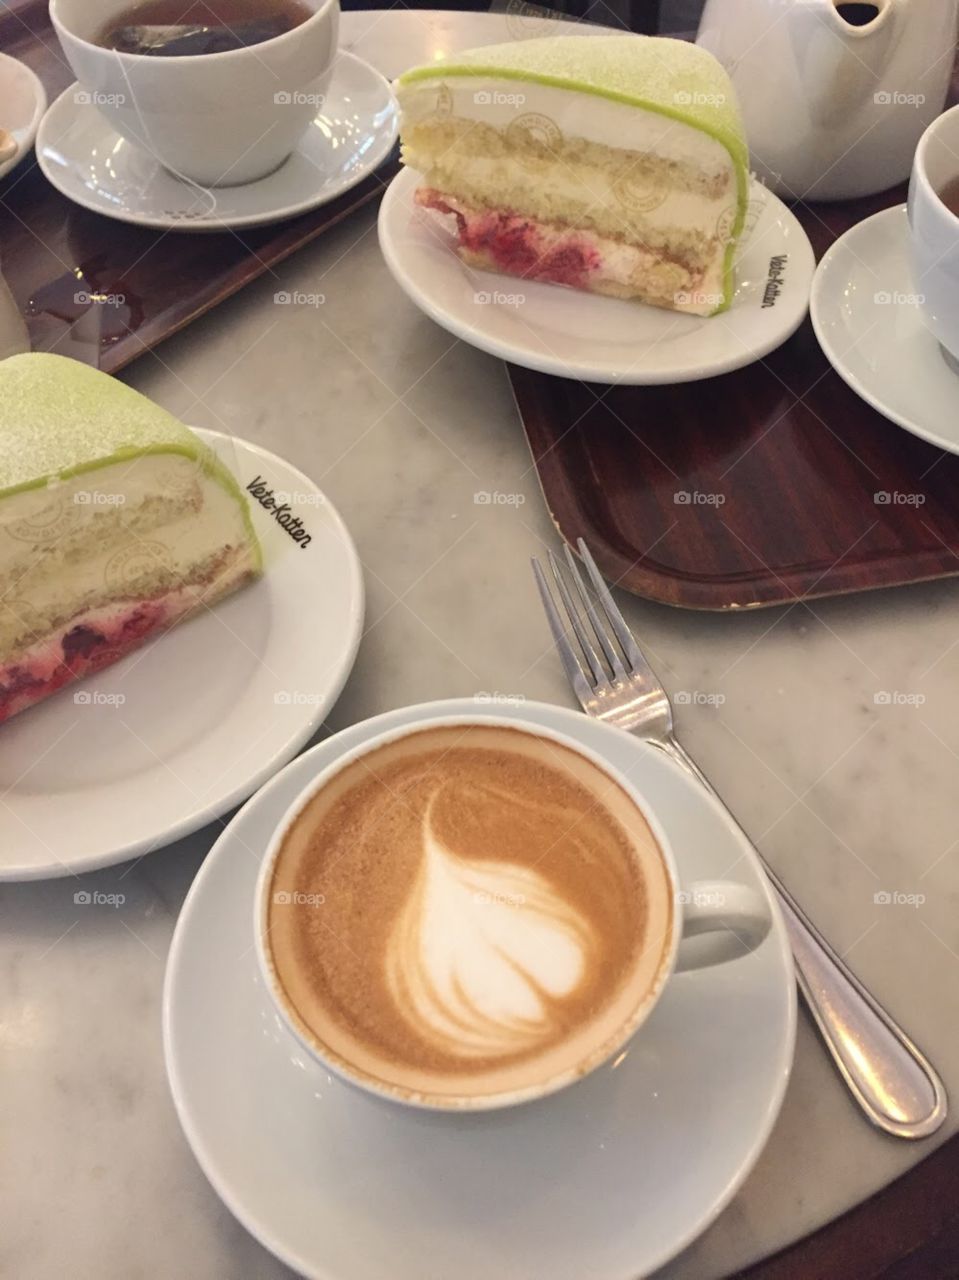 Cappuccino next to two slices of princes cake- green cake with layers of angel food, cream, and raspberry. 